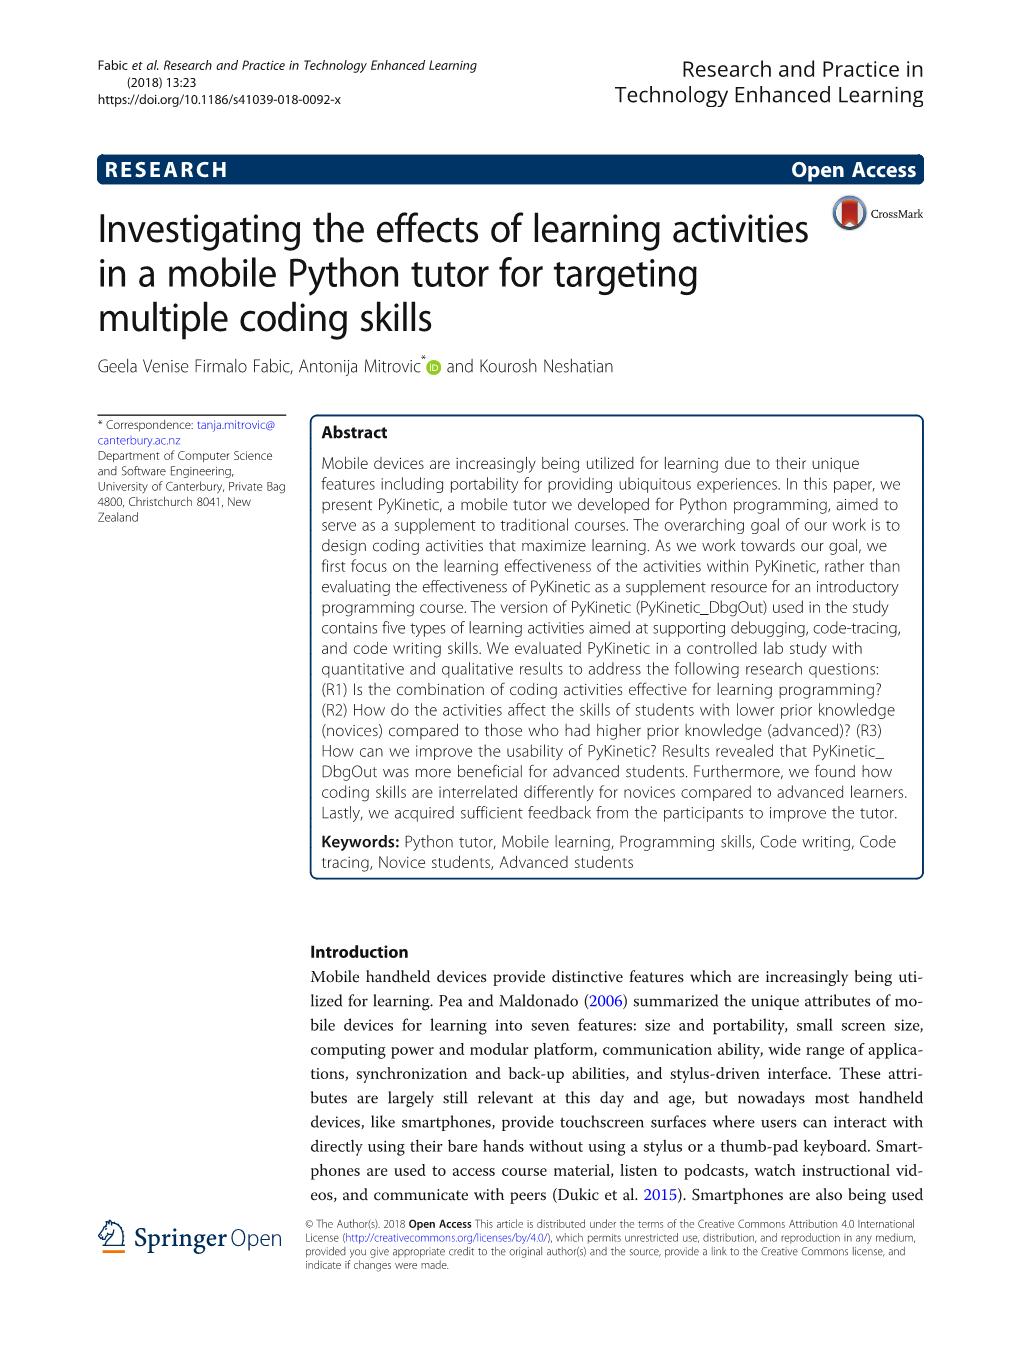 Investigating the Effects of Learning Activities in a Mobile Python Tutor for Targeting Multiple Coding Skills